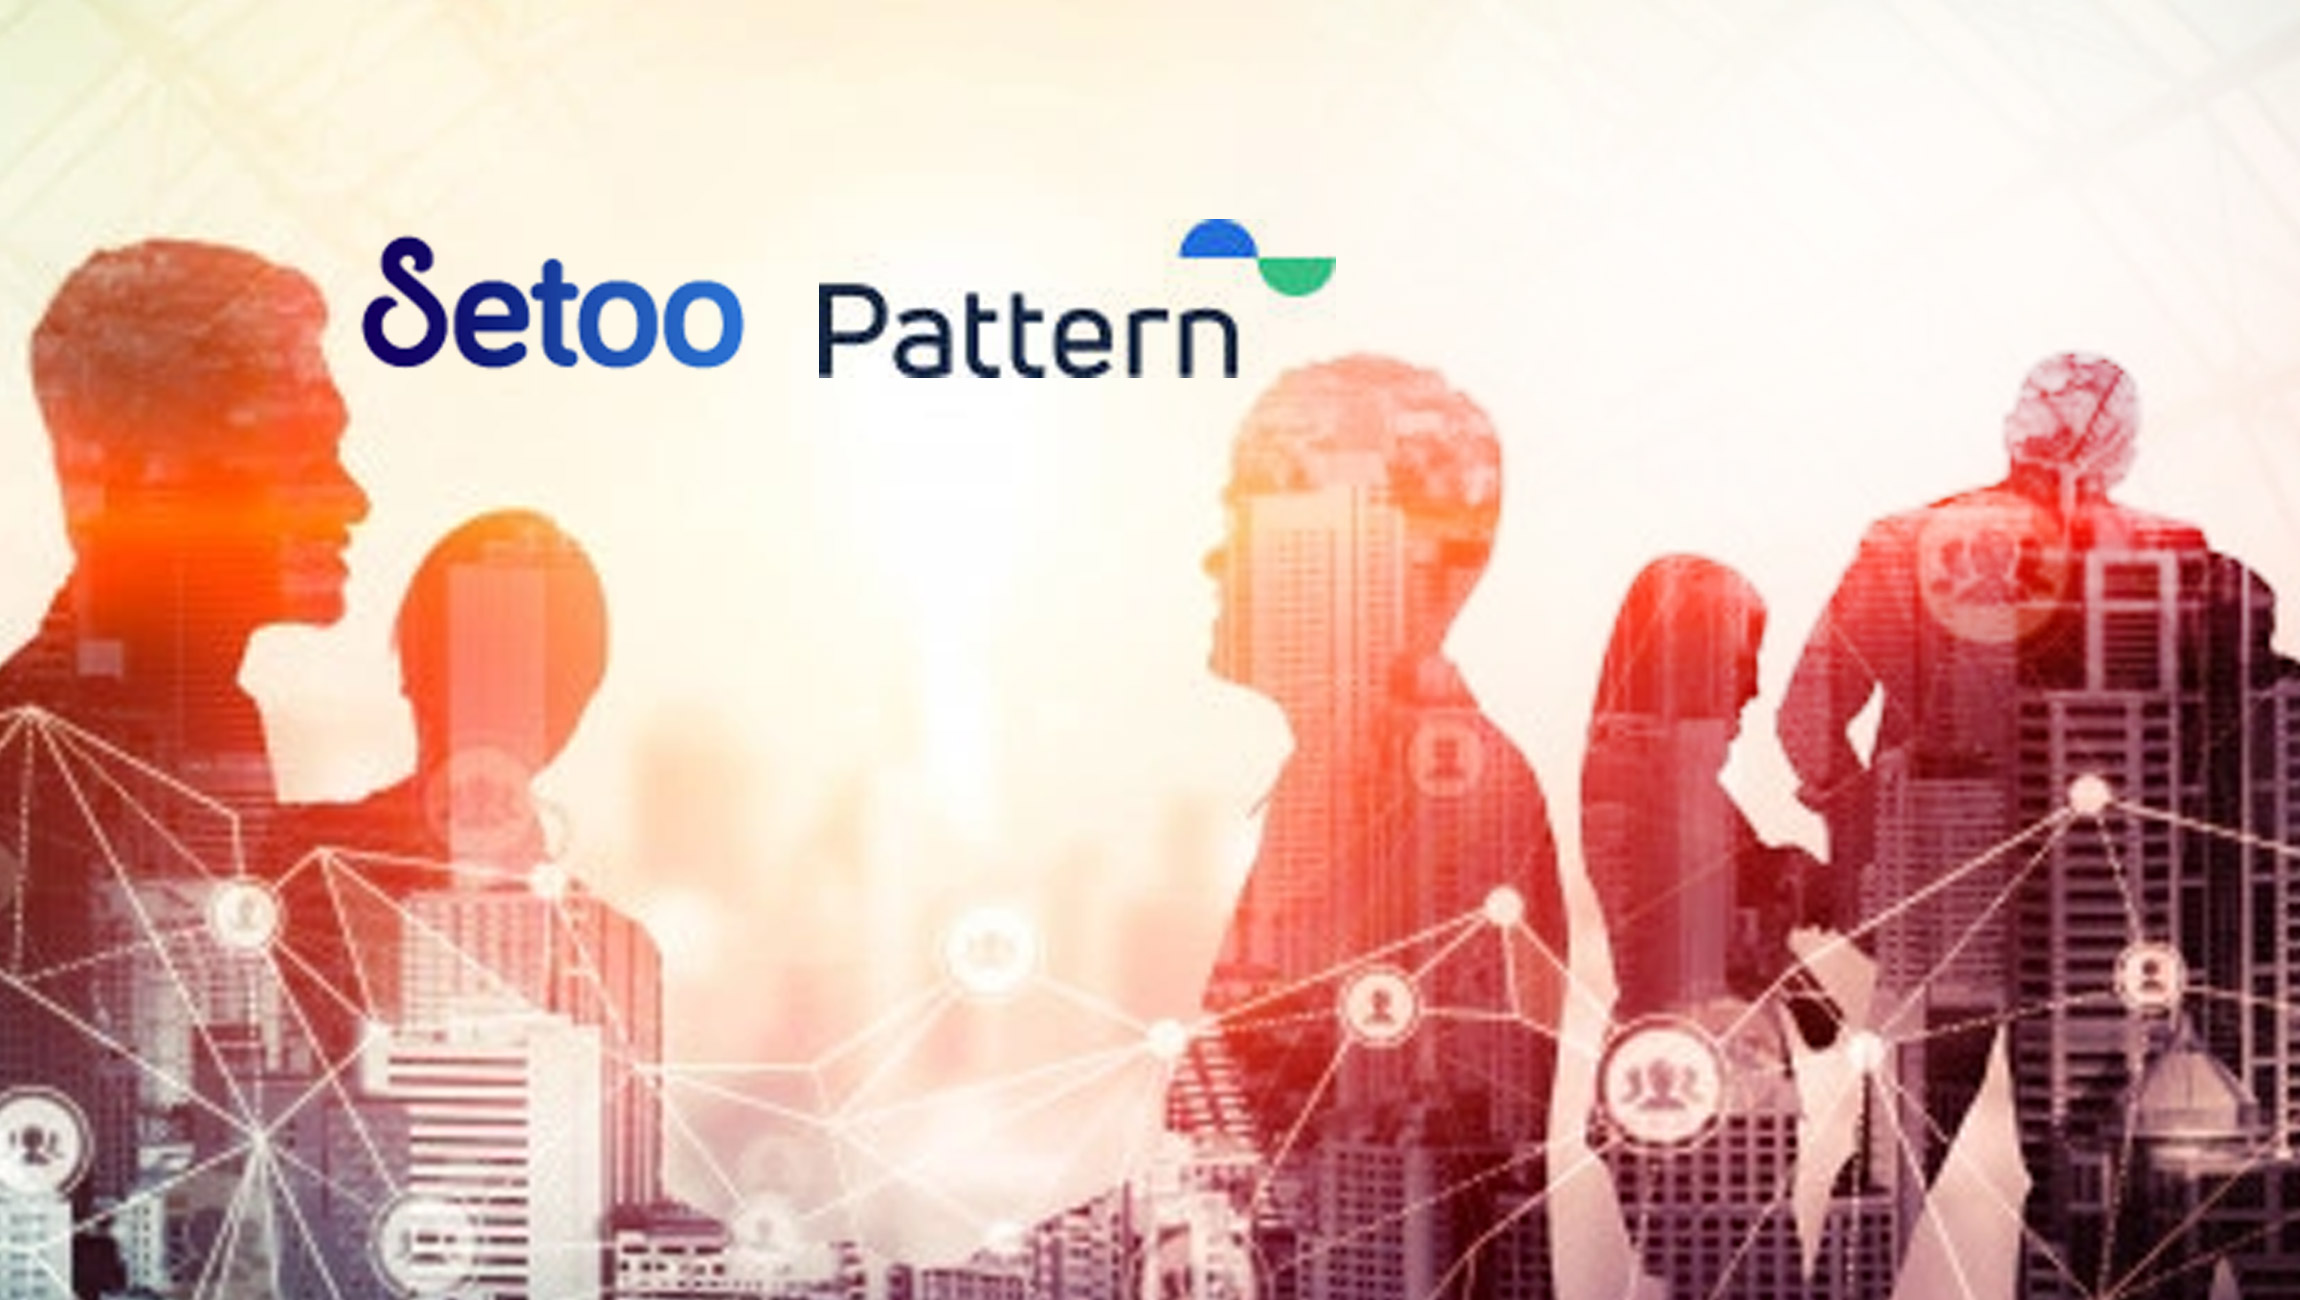 E-Commerce-InsurTech-Pioneer-Setoo-to-Merge-With-Pattern-Insurance-Services_-Creating-an-Embedded-Insurance-Global-Leader